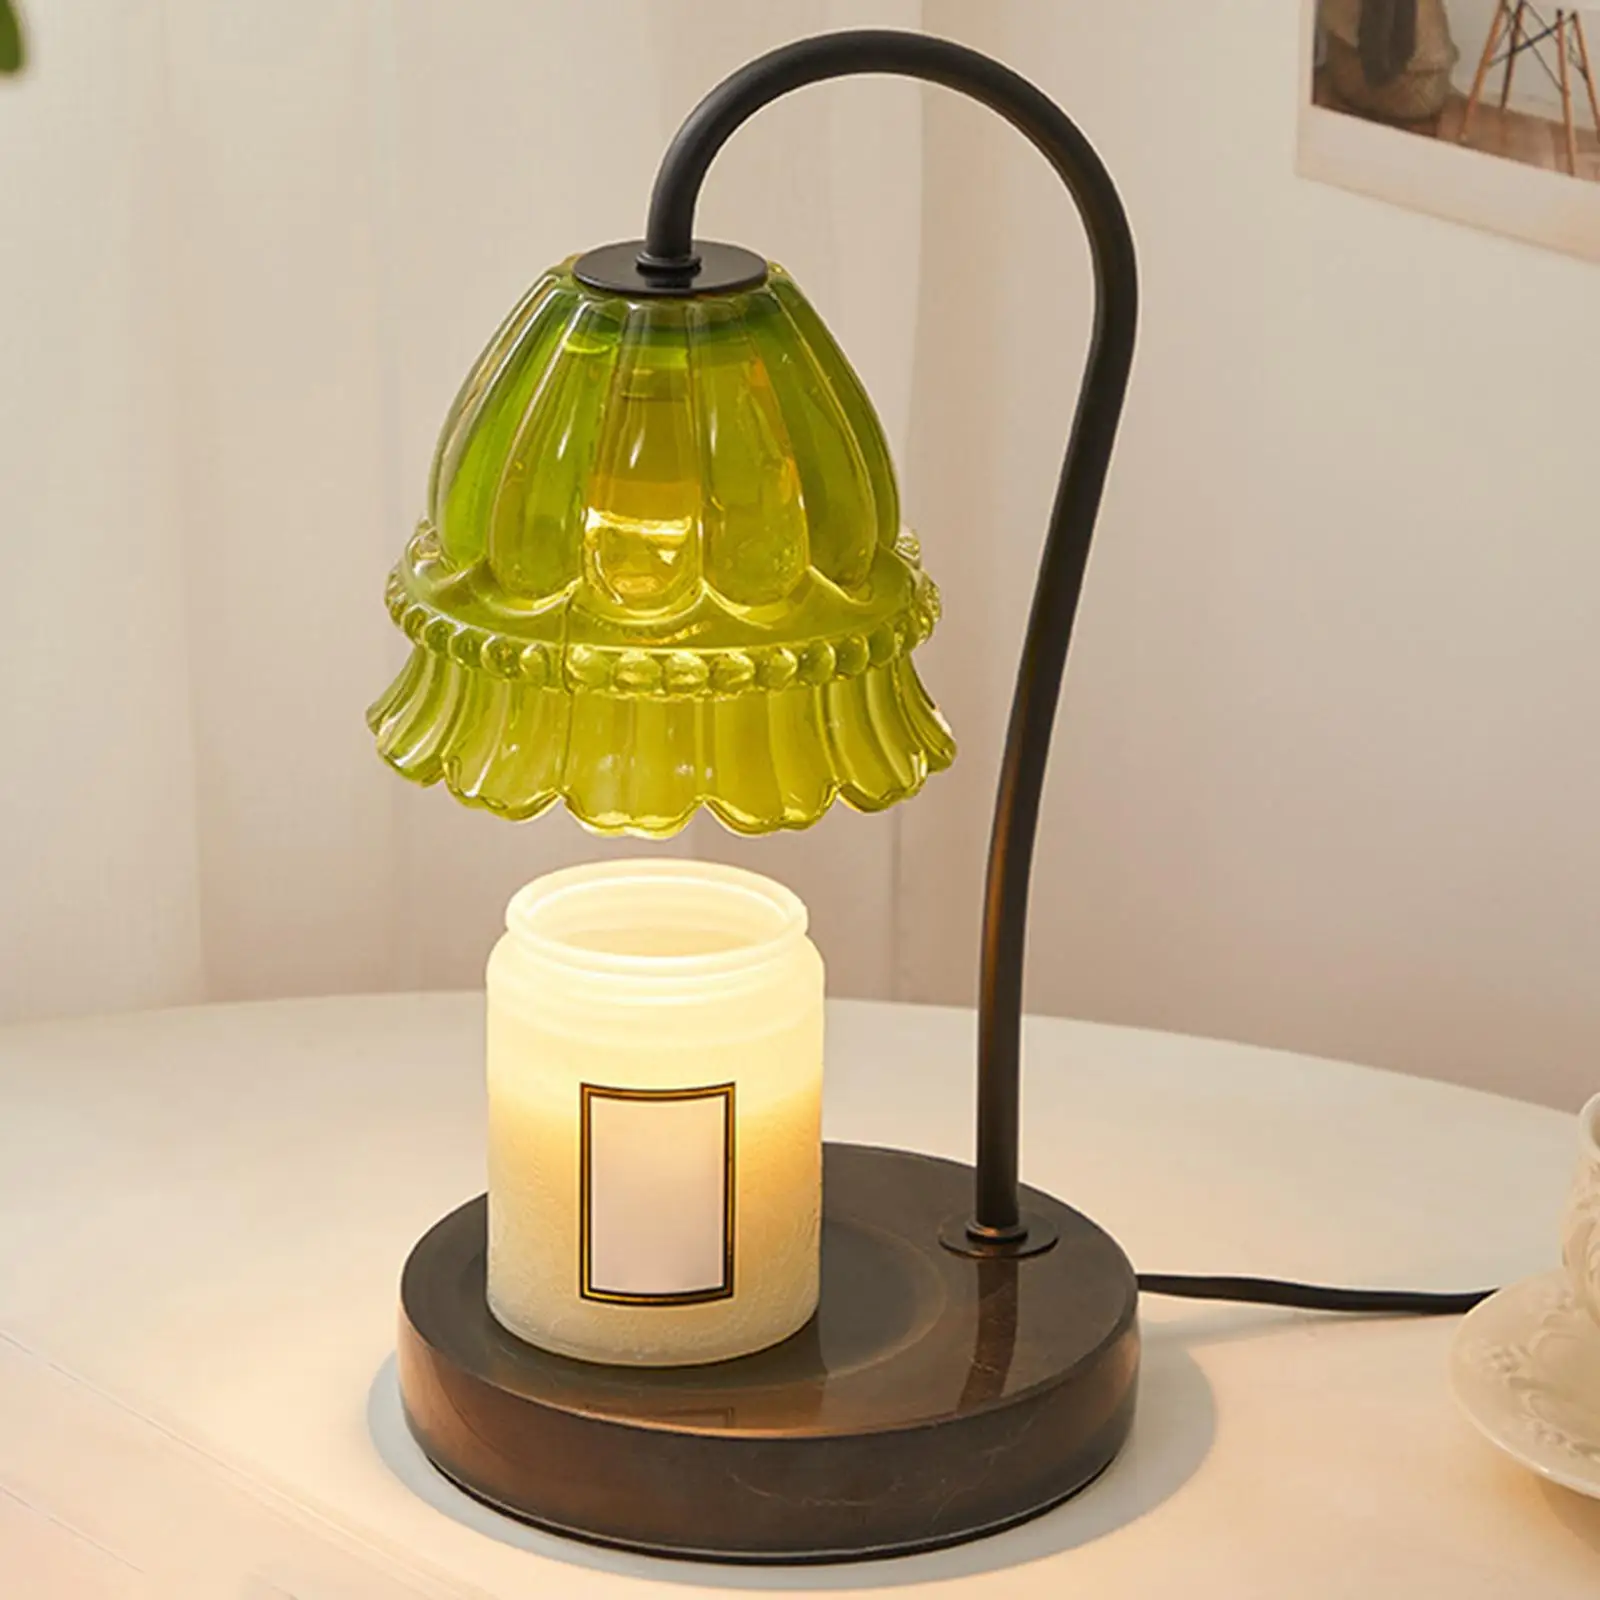 European Style Candle Warmer Lamp  Melting Heater for Bathroom Study Room